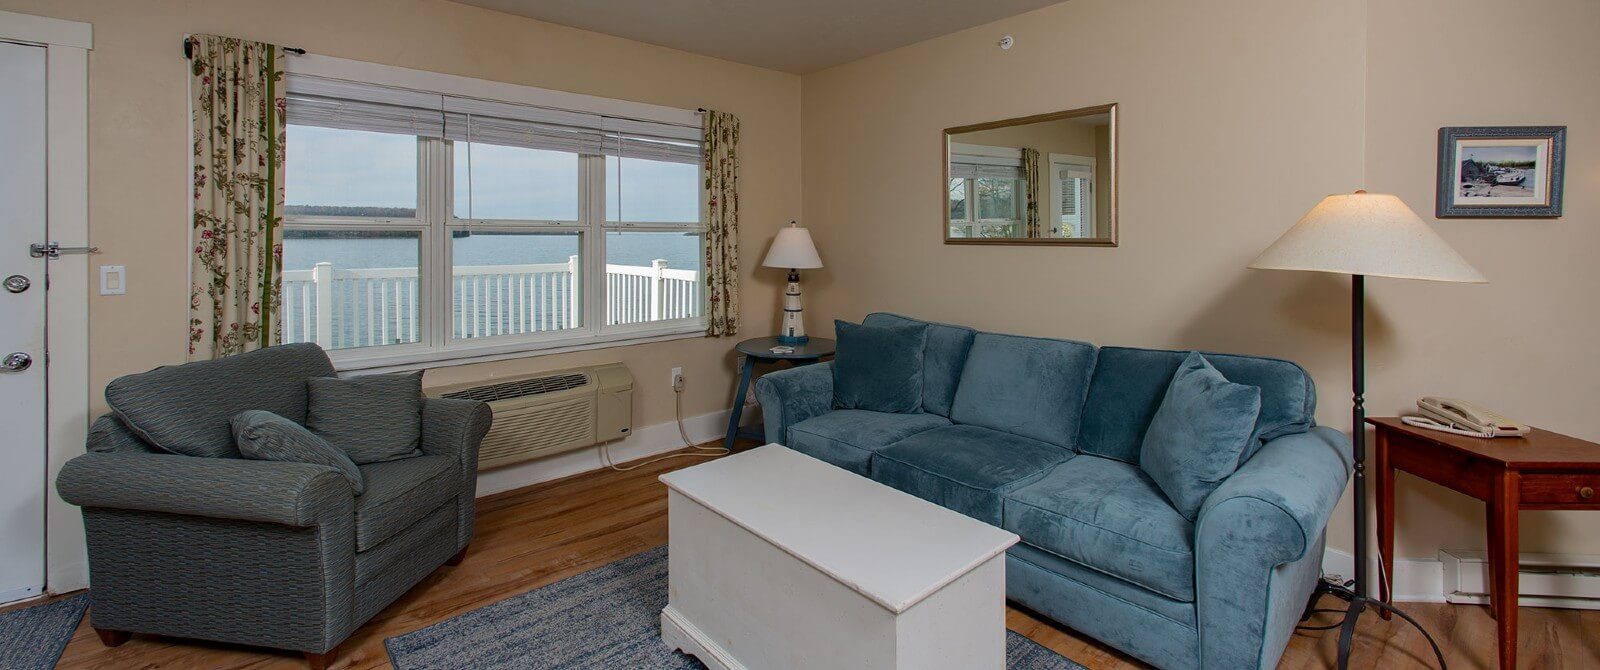 Living room with plush blue couch, chair, coffee table and large window overlooking the water